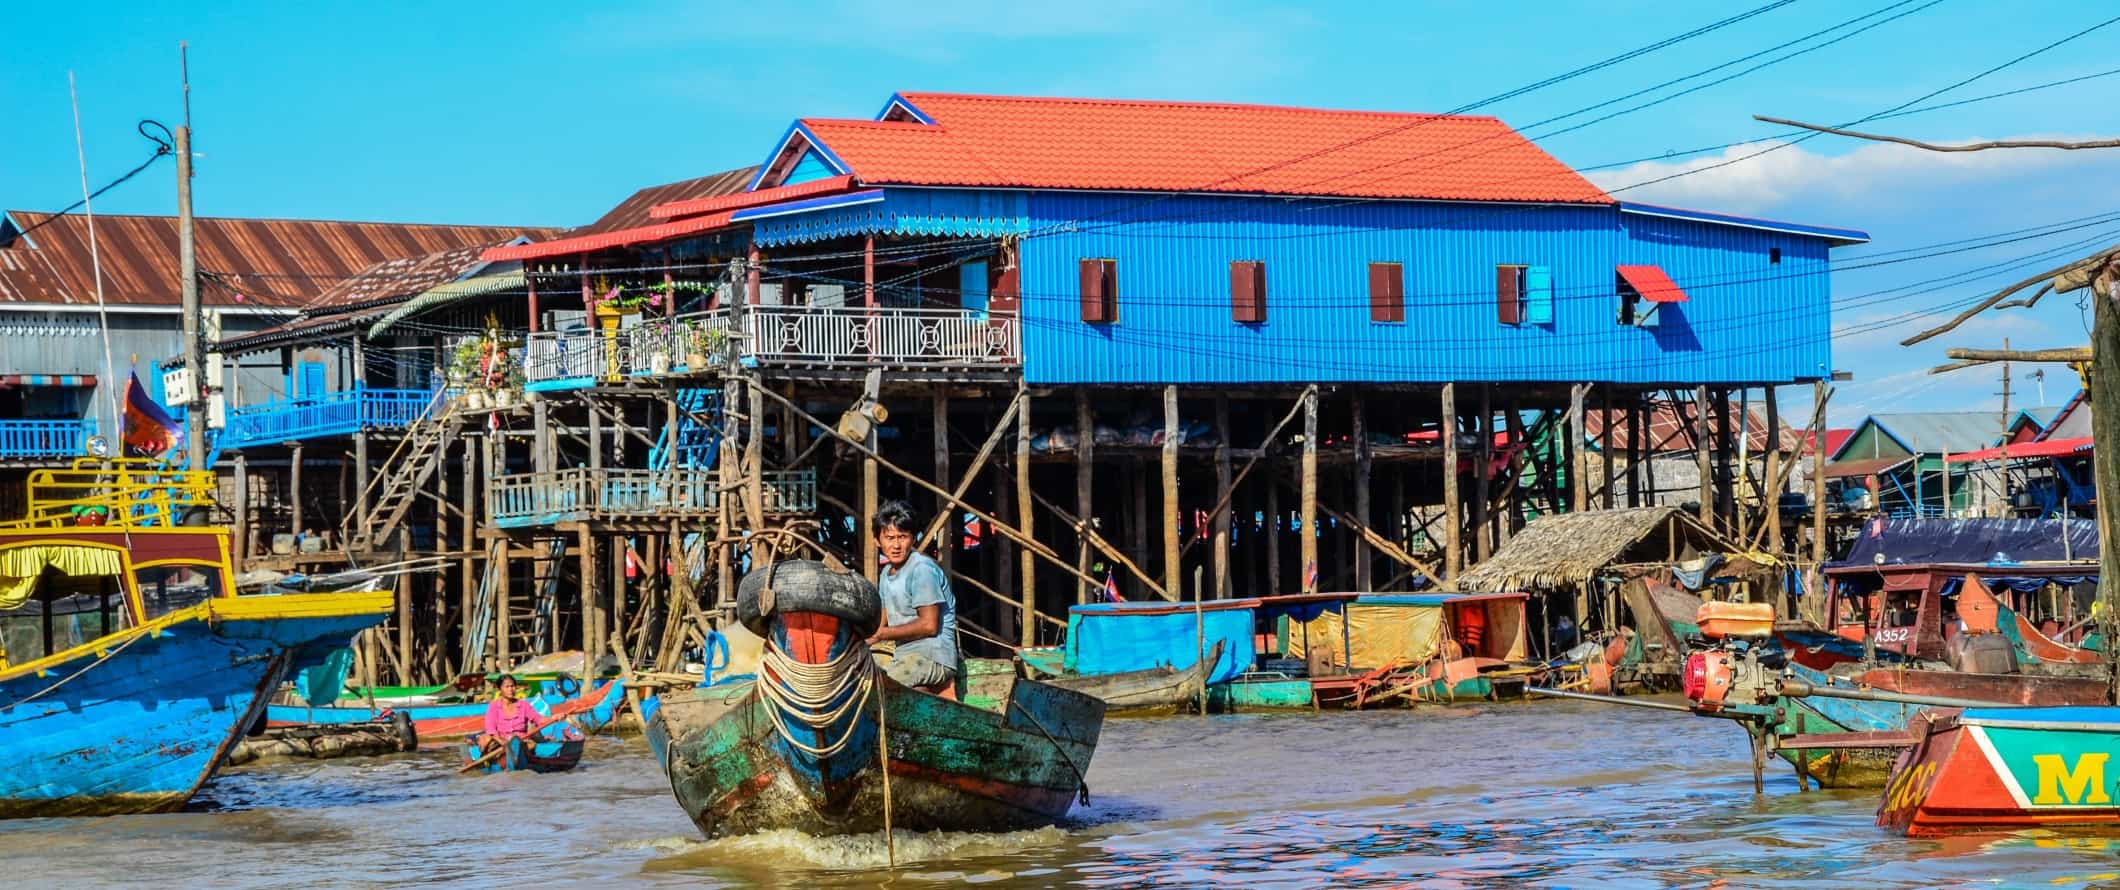 Man driving a boat down a waterway in front of brightly colored houses on stilts in Tonle Sap, Cambodia